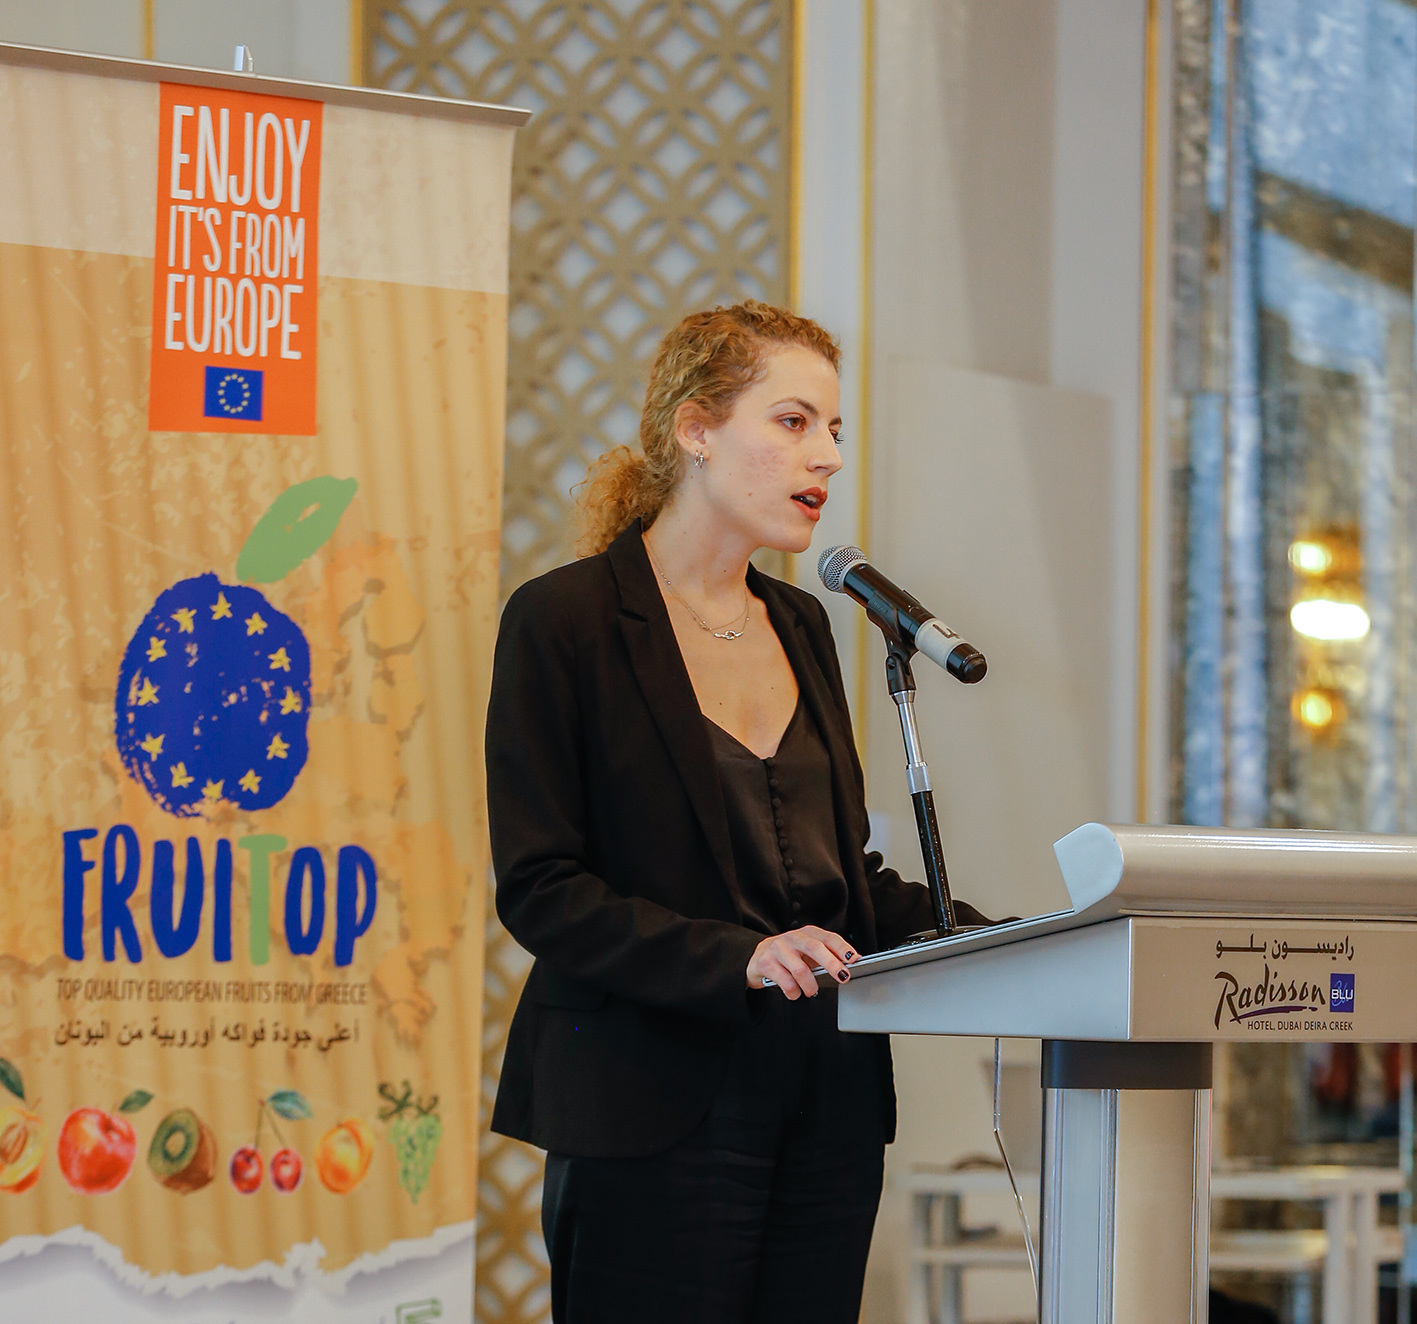 Magdalini Chatzi, Project Manager at NOVACERT, Greece, speaking at "FRUITOP" event.